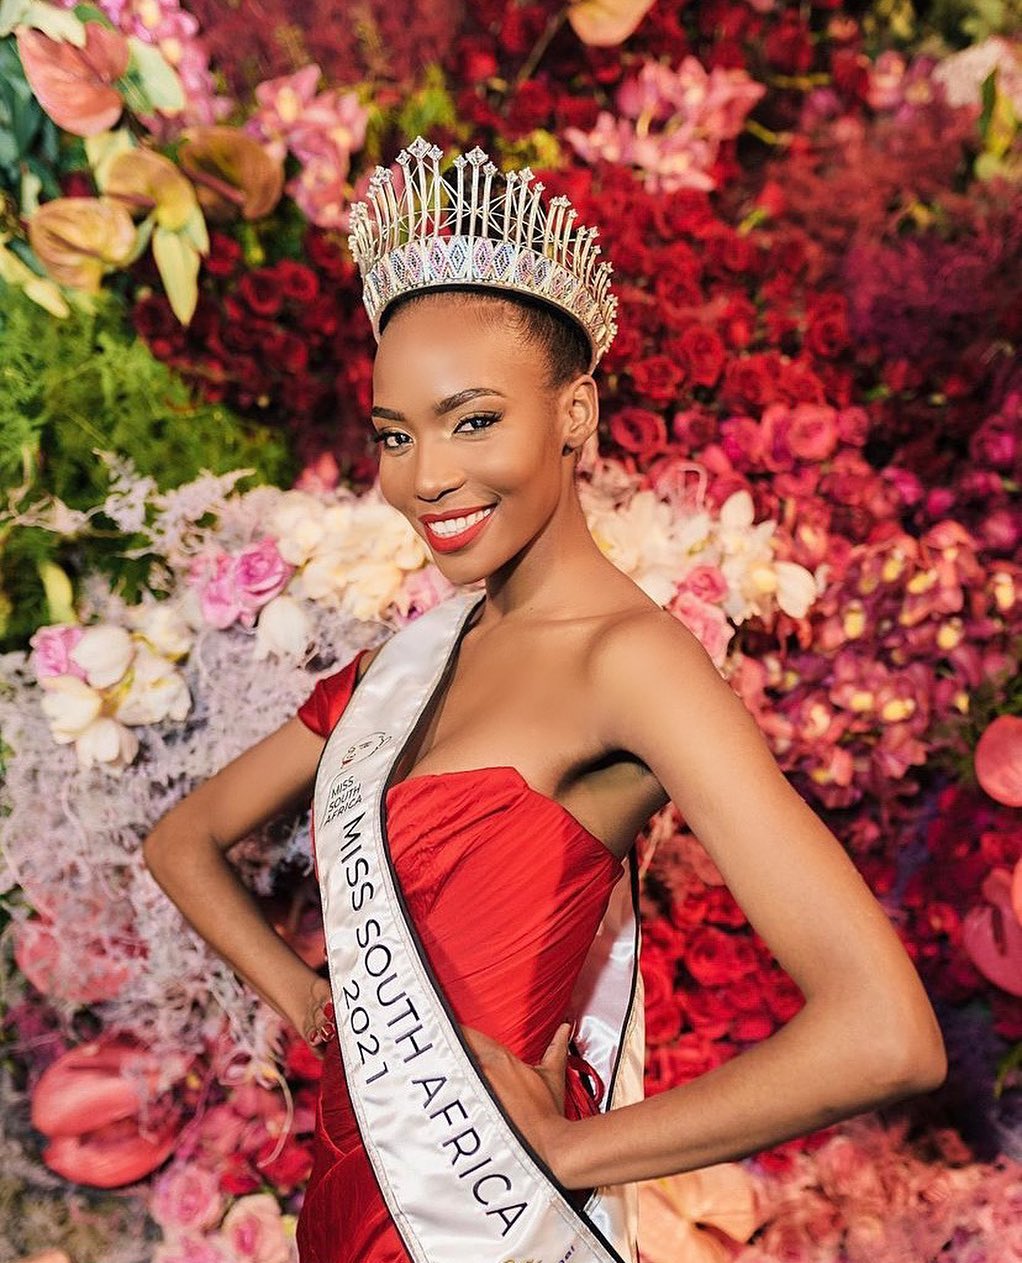 Things to know about the new Miss SA 2021